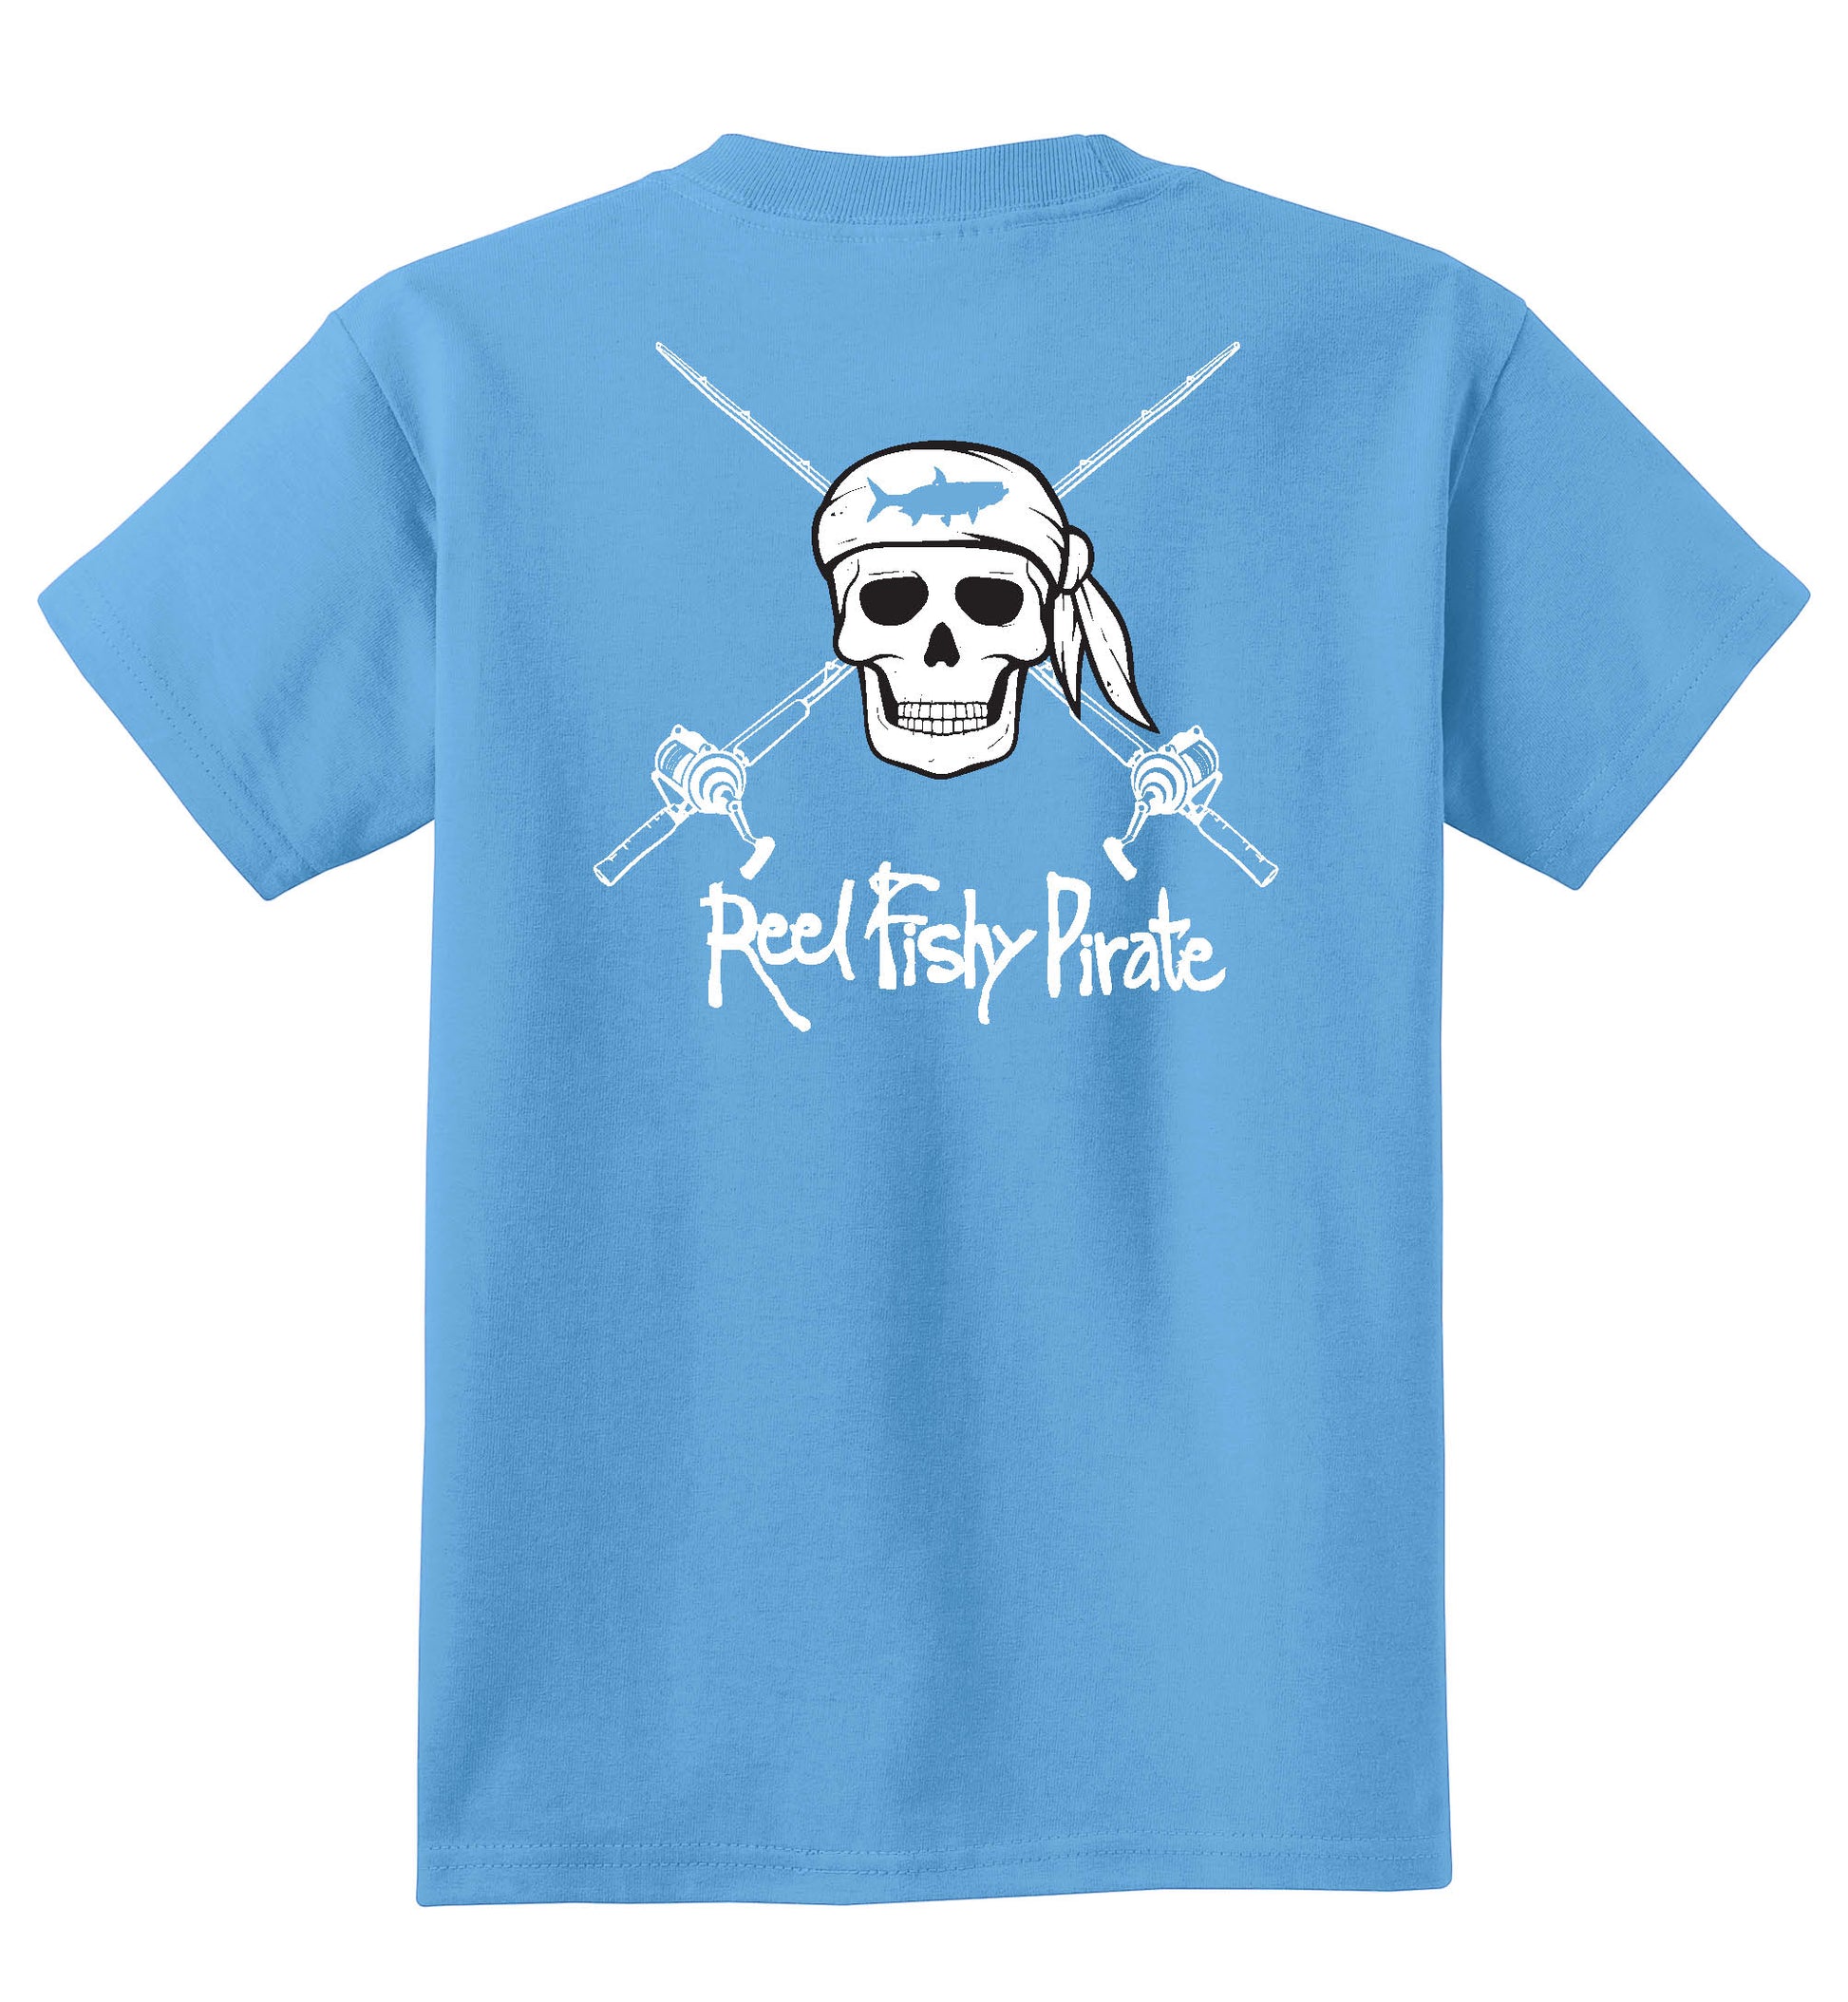 Youth Fishing Cotton T-shirts with Reel Fishy Pirate Skull & Salt Fishing Rods Logo M / Neon Blue